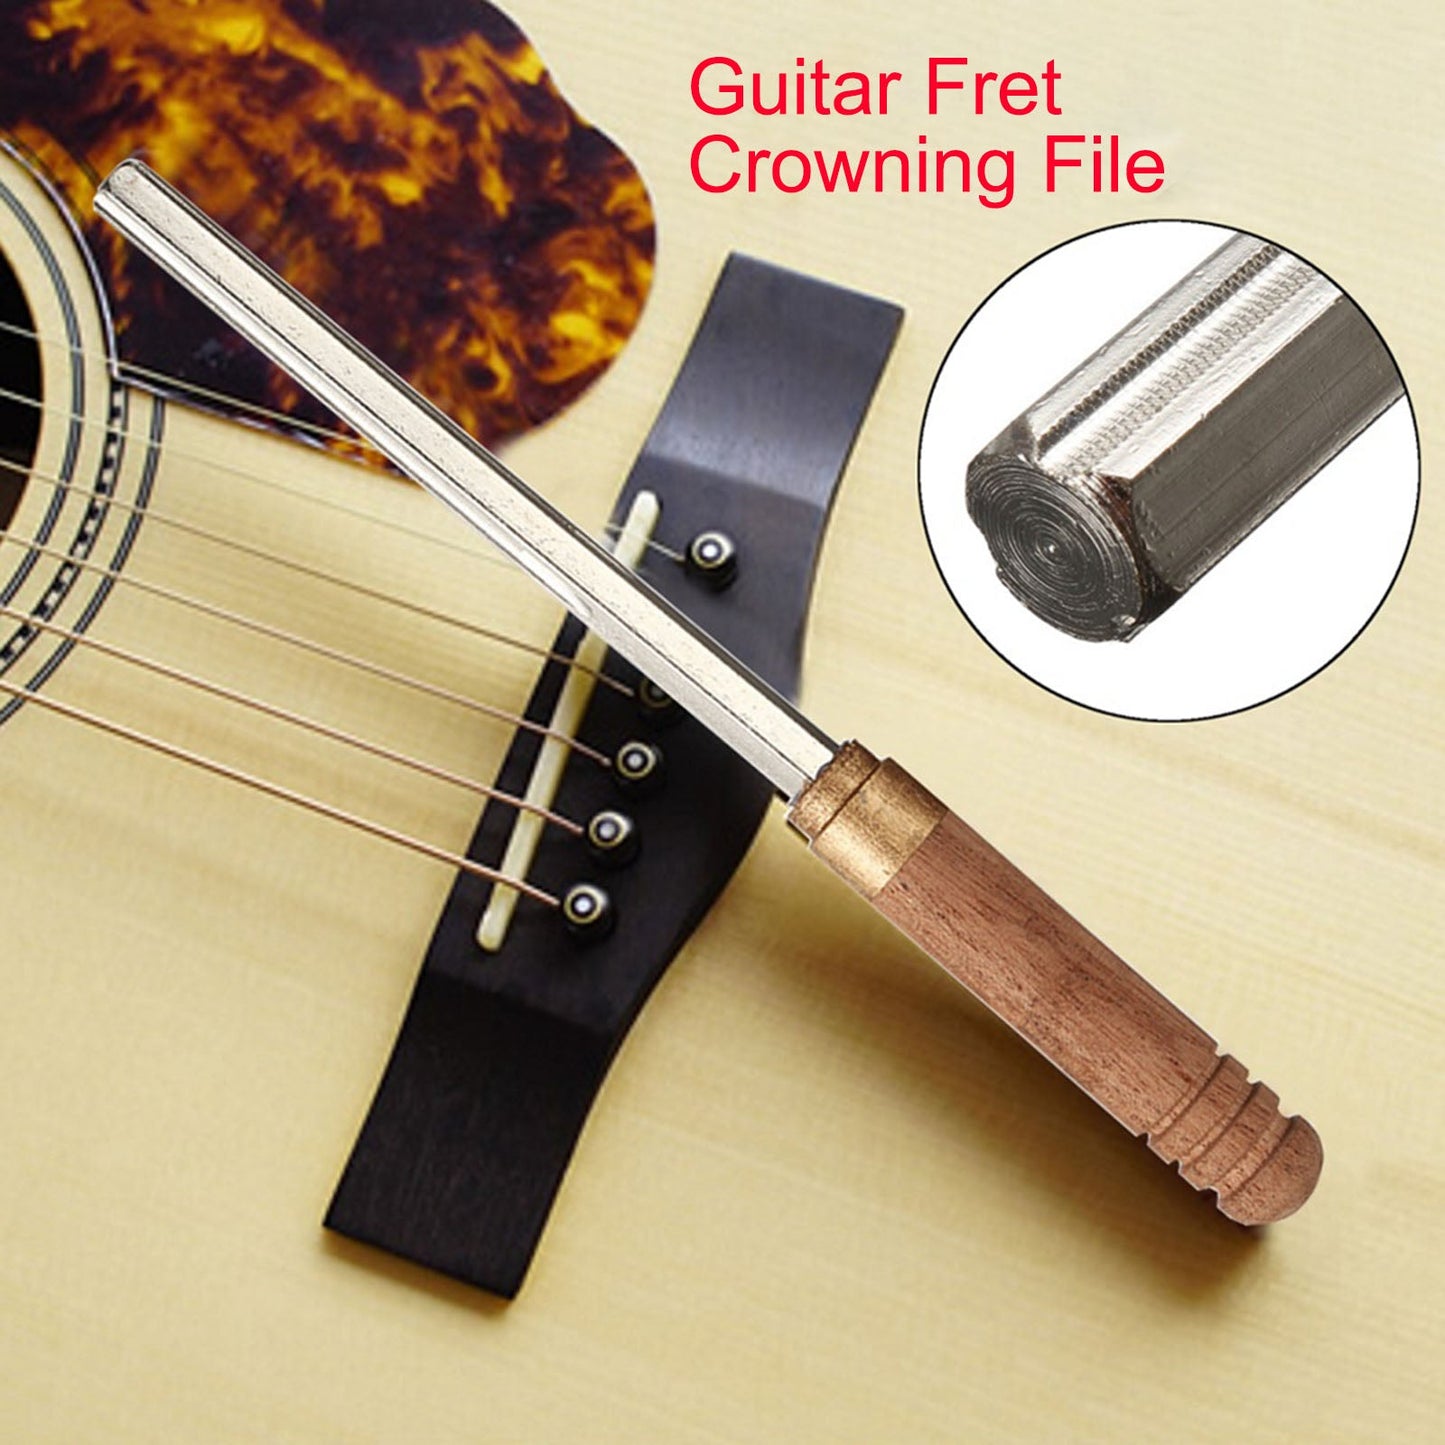 3 Size Baroque Guitar Fret Crowning File Edges Luthier Repair Tool Dressing Set